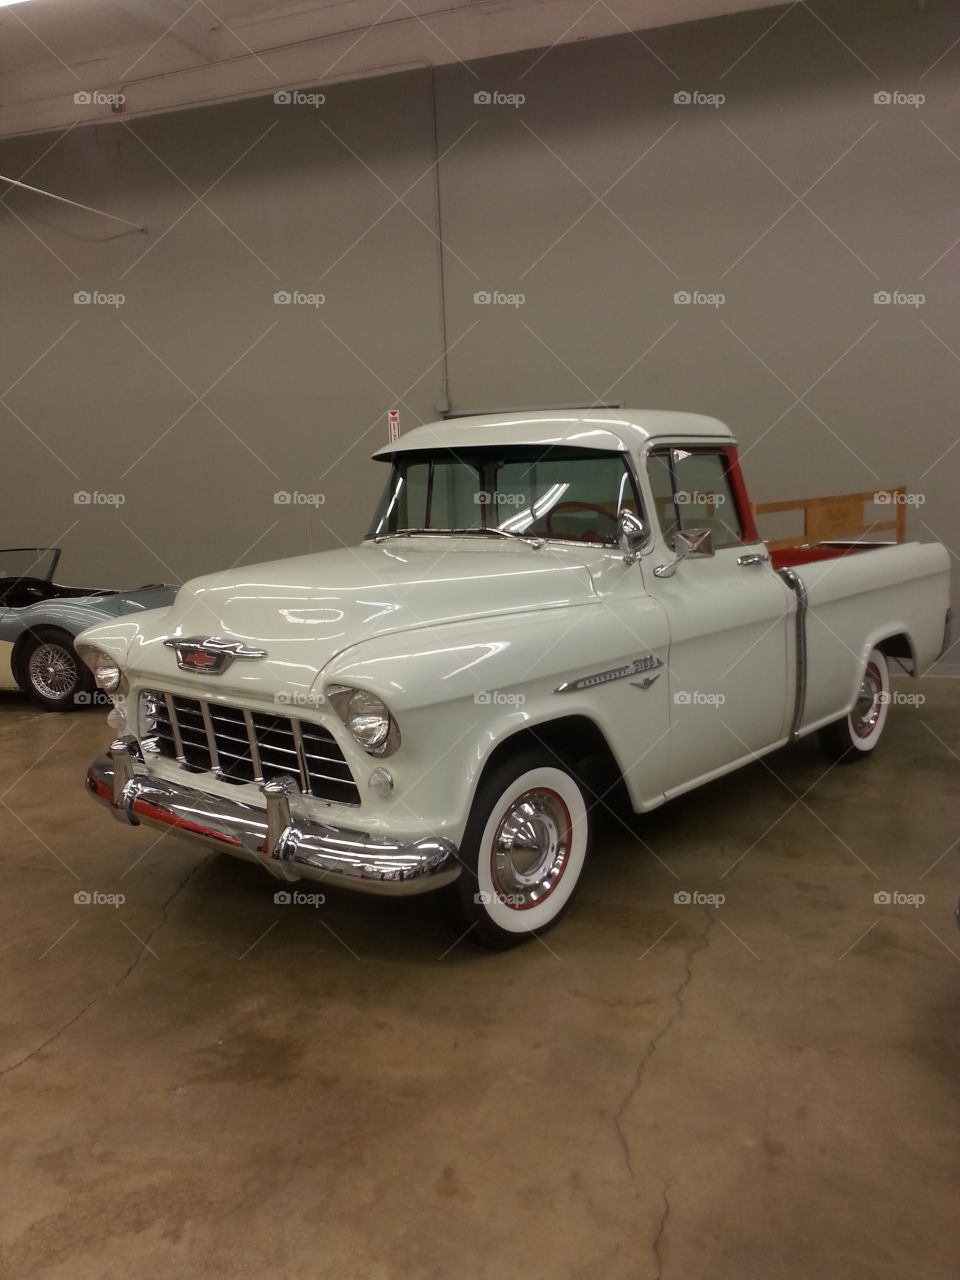 Antique Chevy pickup